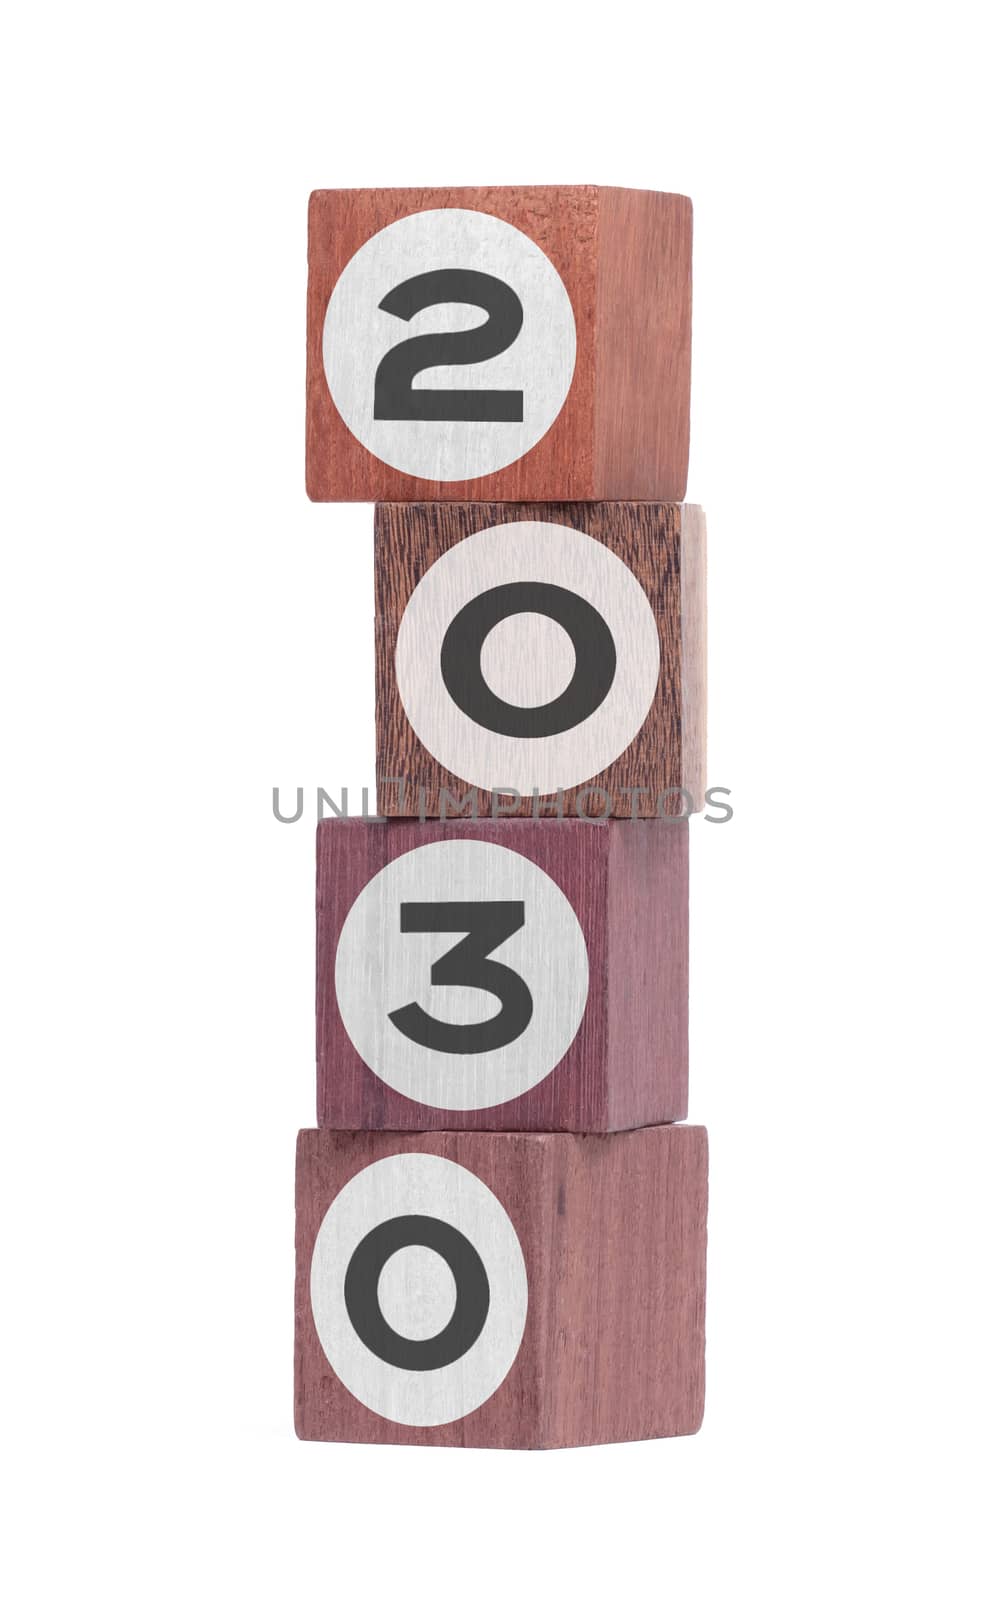 Four isolated hardwood toy blocks, saying 2030 by michaklootwijk